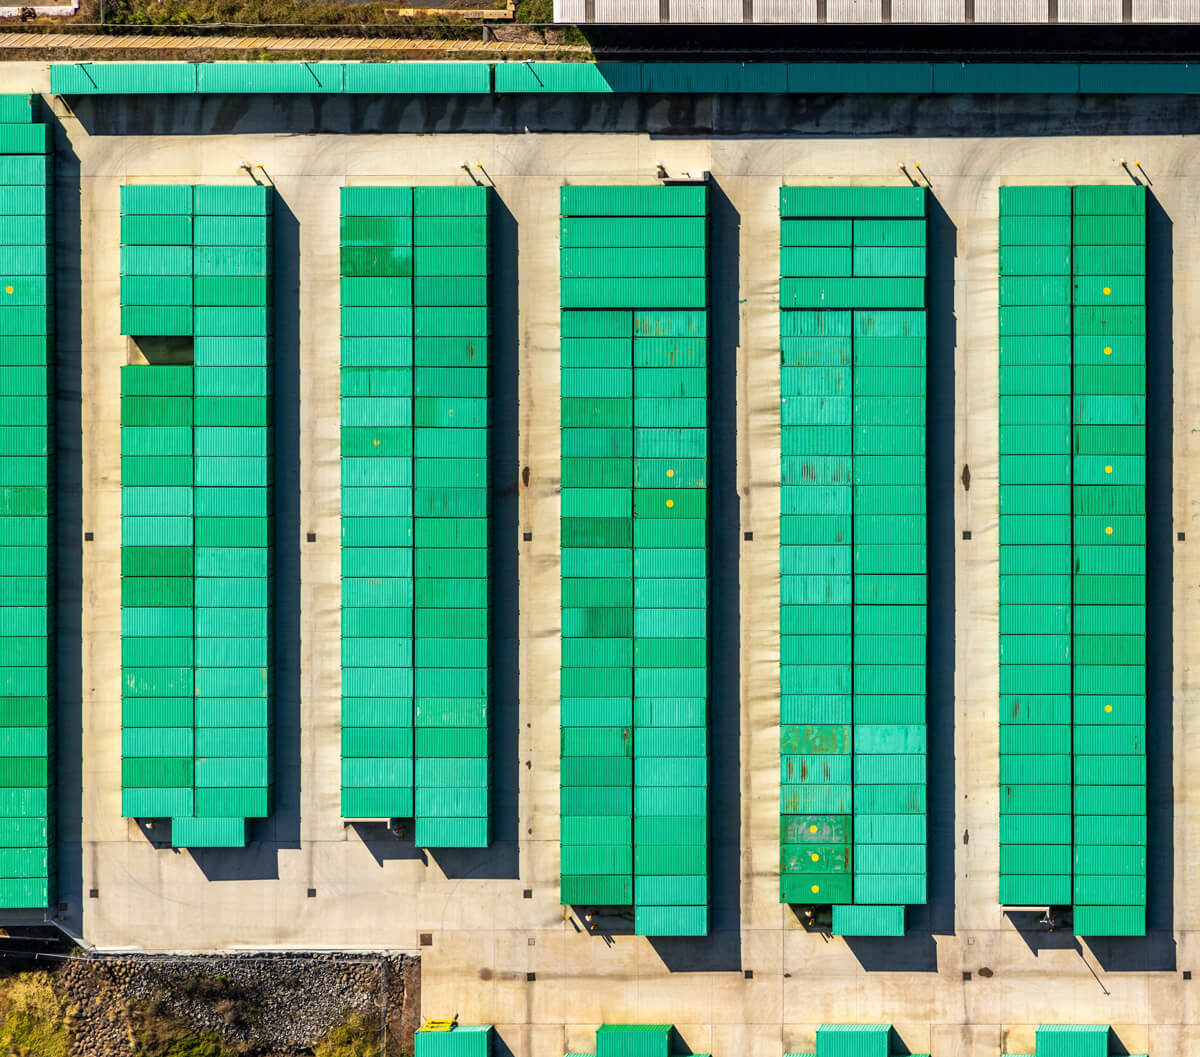 Shipping containers in a row, seen from above